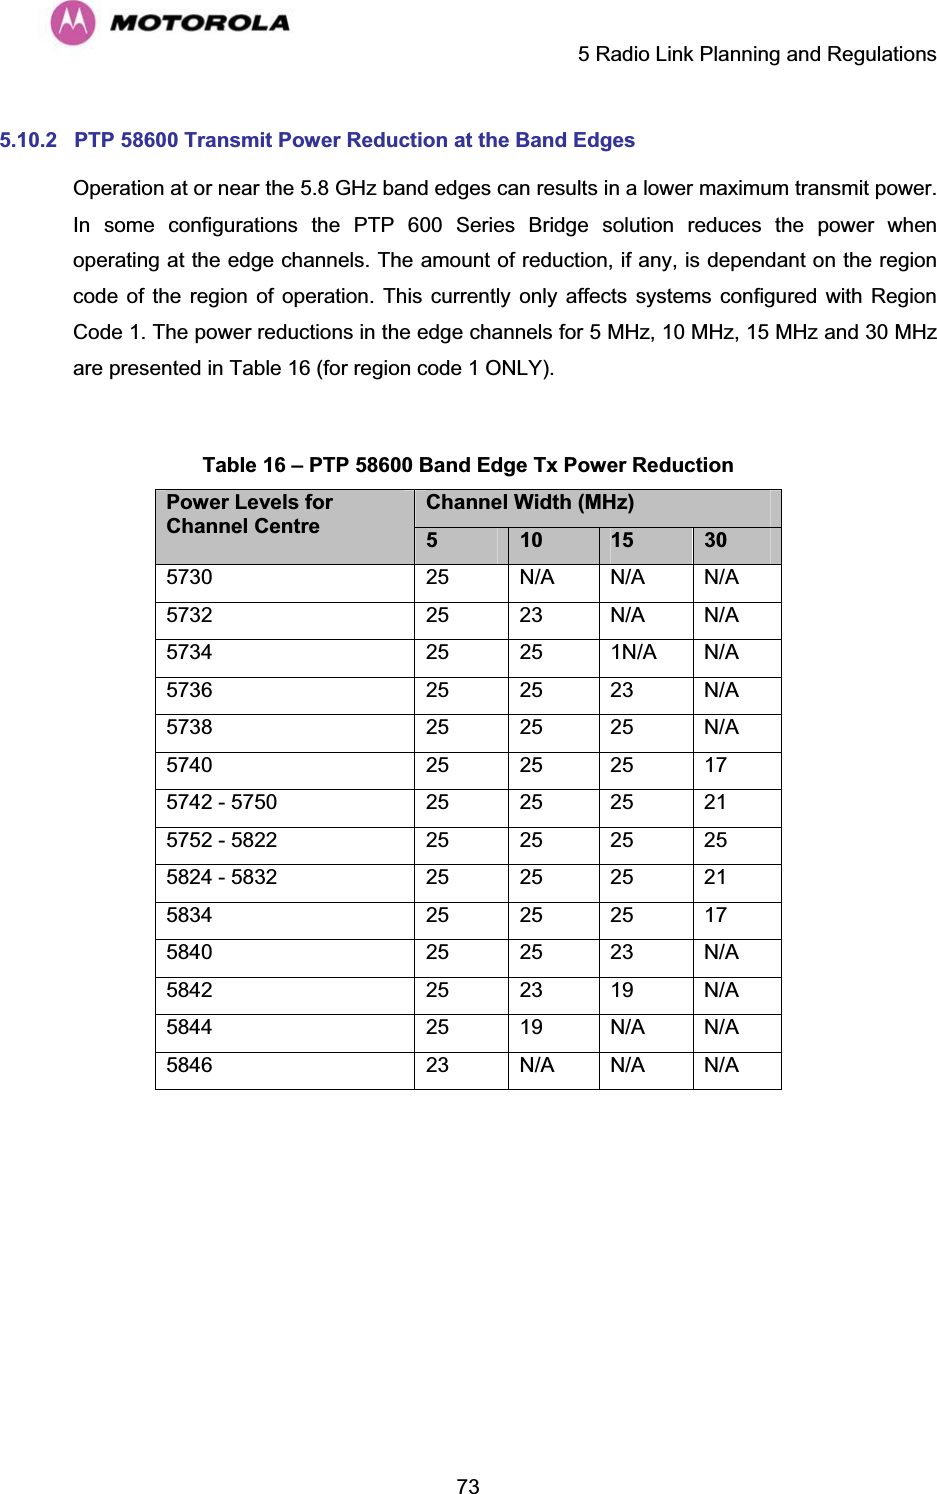     5 Radio Link Planning and Regulations  735.10.2  PTP 58600 Transmit Power Reduction at the Band Edges Operation at or near the 5.8 GHz band edges can results in a lower maximum transmit power. In some configurations the PTP 600 Series Bridge solution reduces the power when operating at the edge channels. The amount of reduction, if any, is dependant on the region code of the region of operation. This currently only affects systems configured with Region Code 1. The power reductions in the edge channels for 5 MHz, 10 MHz, 15 MHz and 30 MHz are presented in Table 16 (for region code 1 ONLY).  Table 16 – PTP 58600 Band Edge Tx Power Reduction Channel Width (MHz) Power Levels for Channel Centre  510 15 305730  25   N/A   N/A   N/A  5732  25   23   N/A   N/A  5734  25   25   1N/A   N/A  5736  25   25   23   N/A  5738  25   25   25   N/A  5740  25   25   25   17  5742 - 5750  25   25   25   21  5752 - 5822  25   25   25   25  5824 - 5832  25   25   25   21  5834  25   25   25   17  5840  25   25   23   N/A  5842  25   23   19   N/A  5844  25   19   N/A   N/A  5846  23   N/A   N/A   N/A  